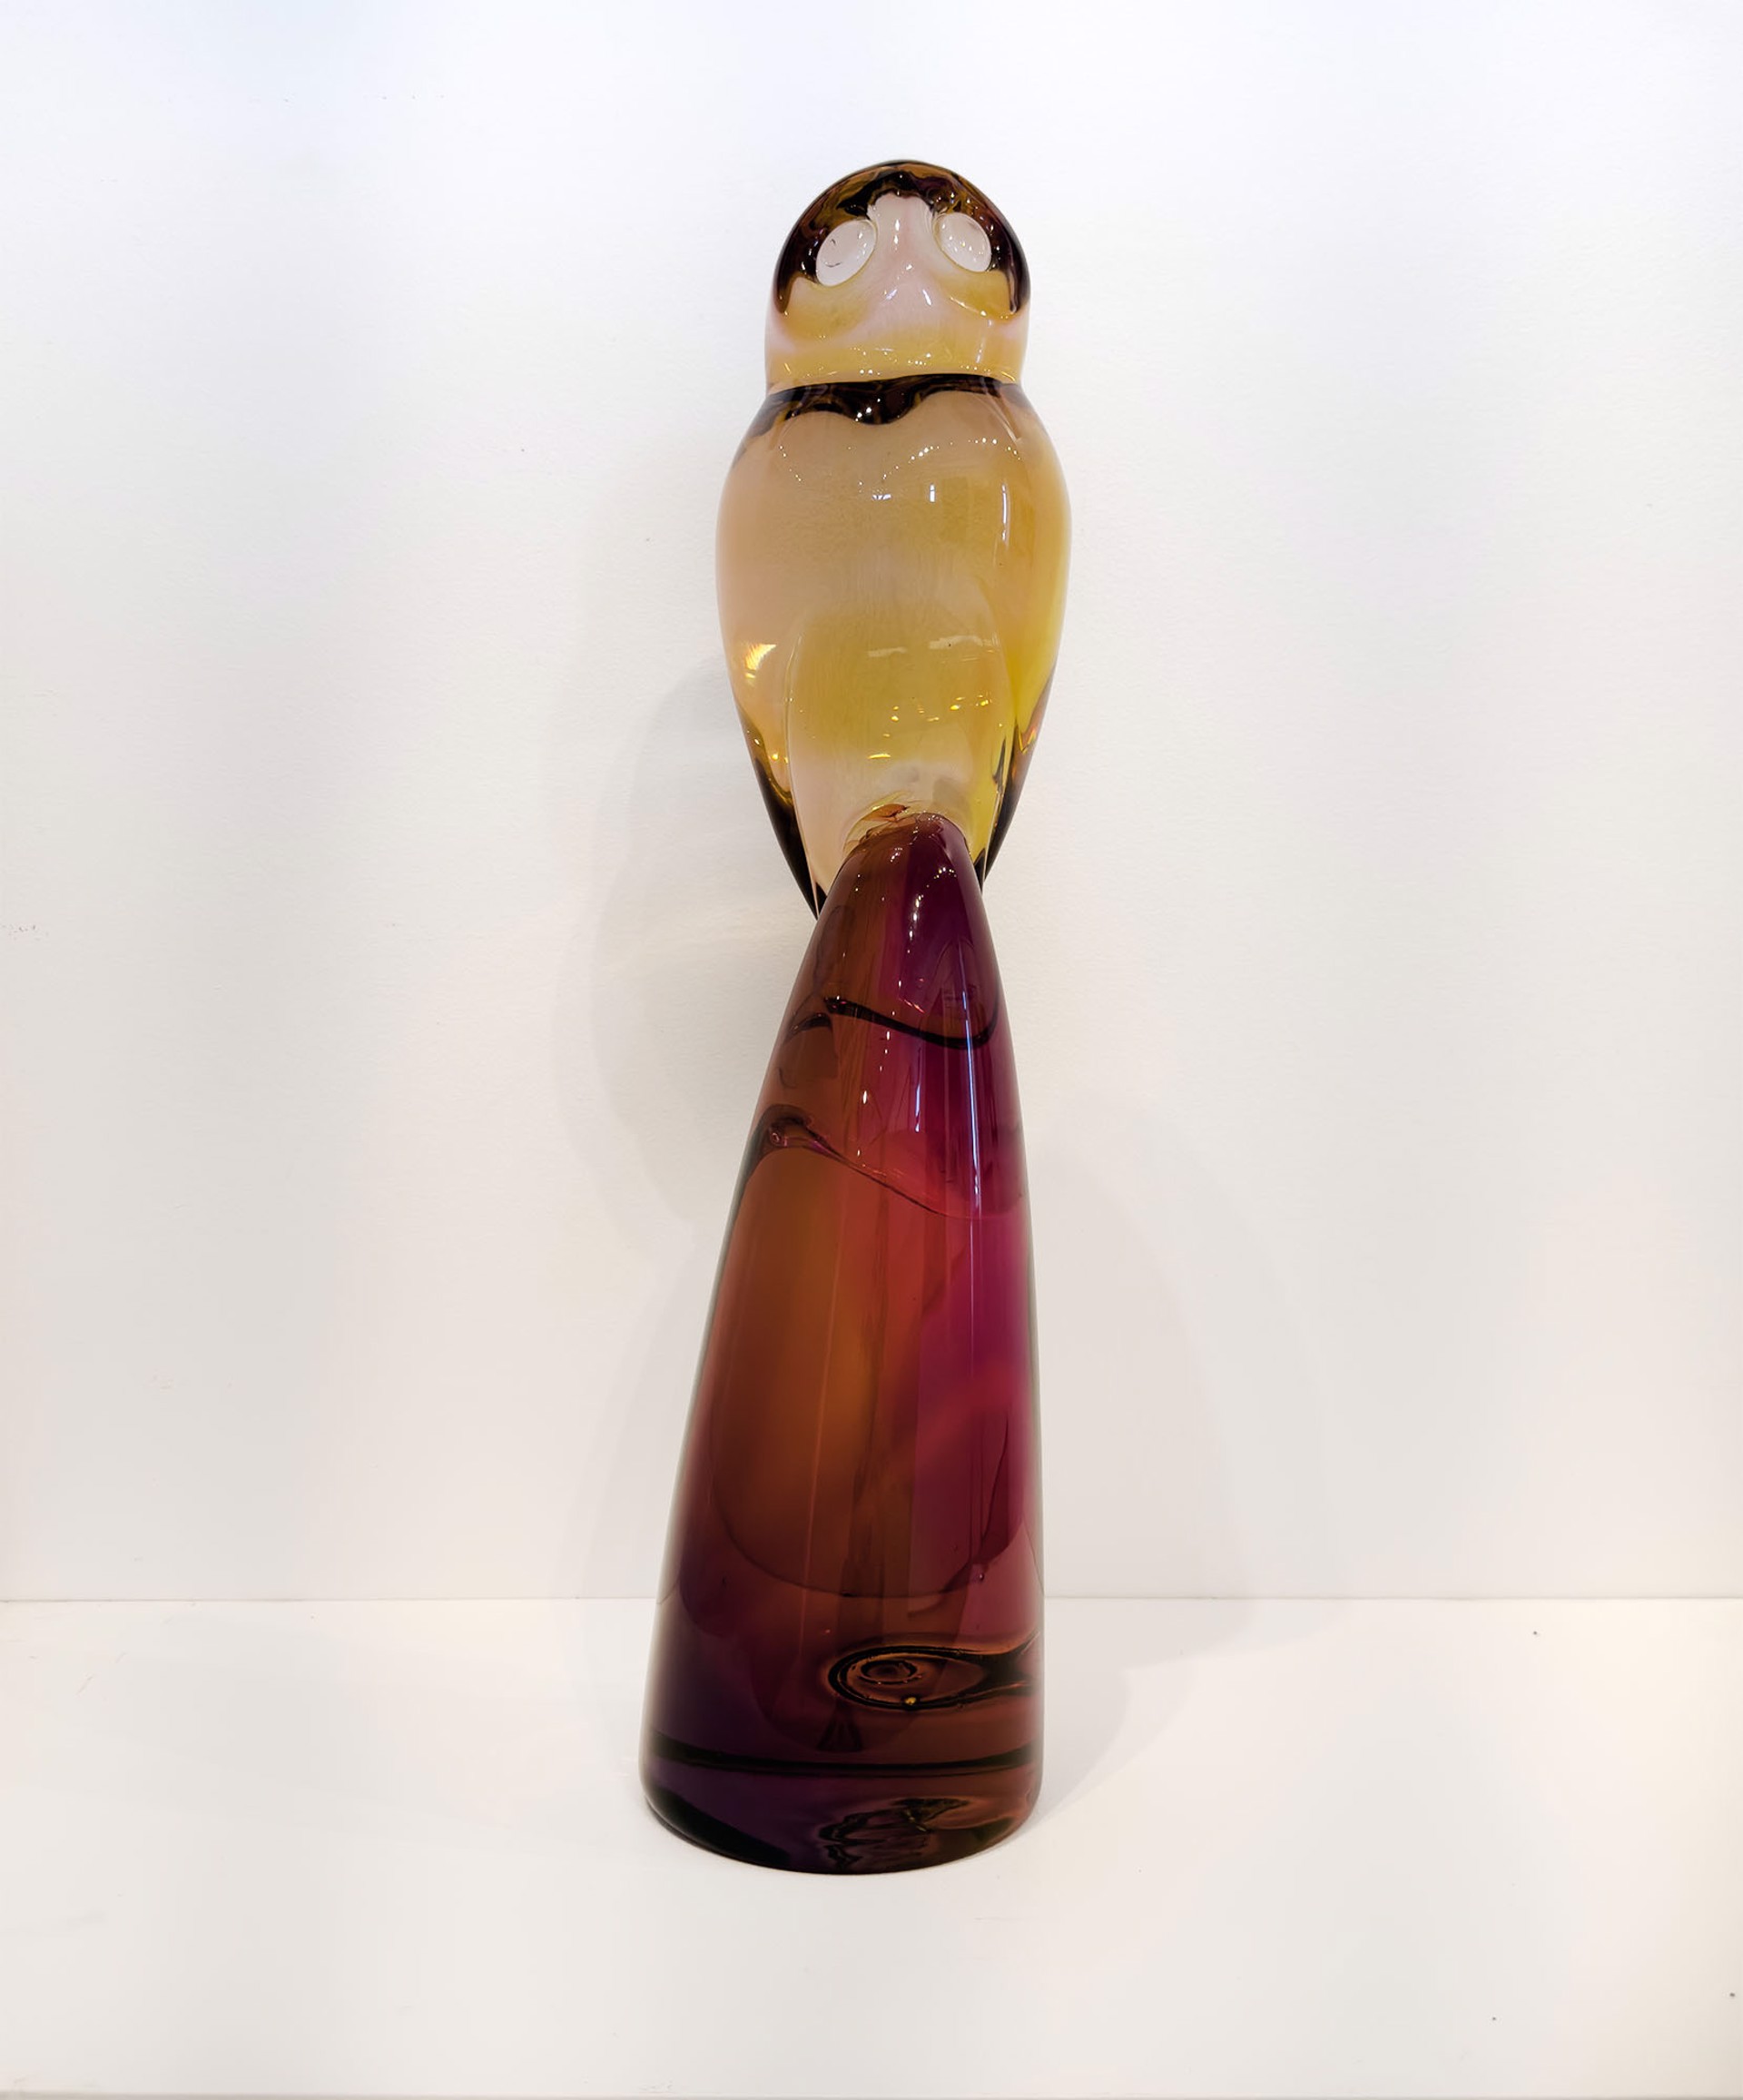 Original Hand Blown Glass Sculpture By Dan Friday Featuring A Yellow Owl Perched On Magenta Totem